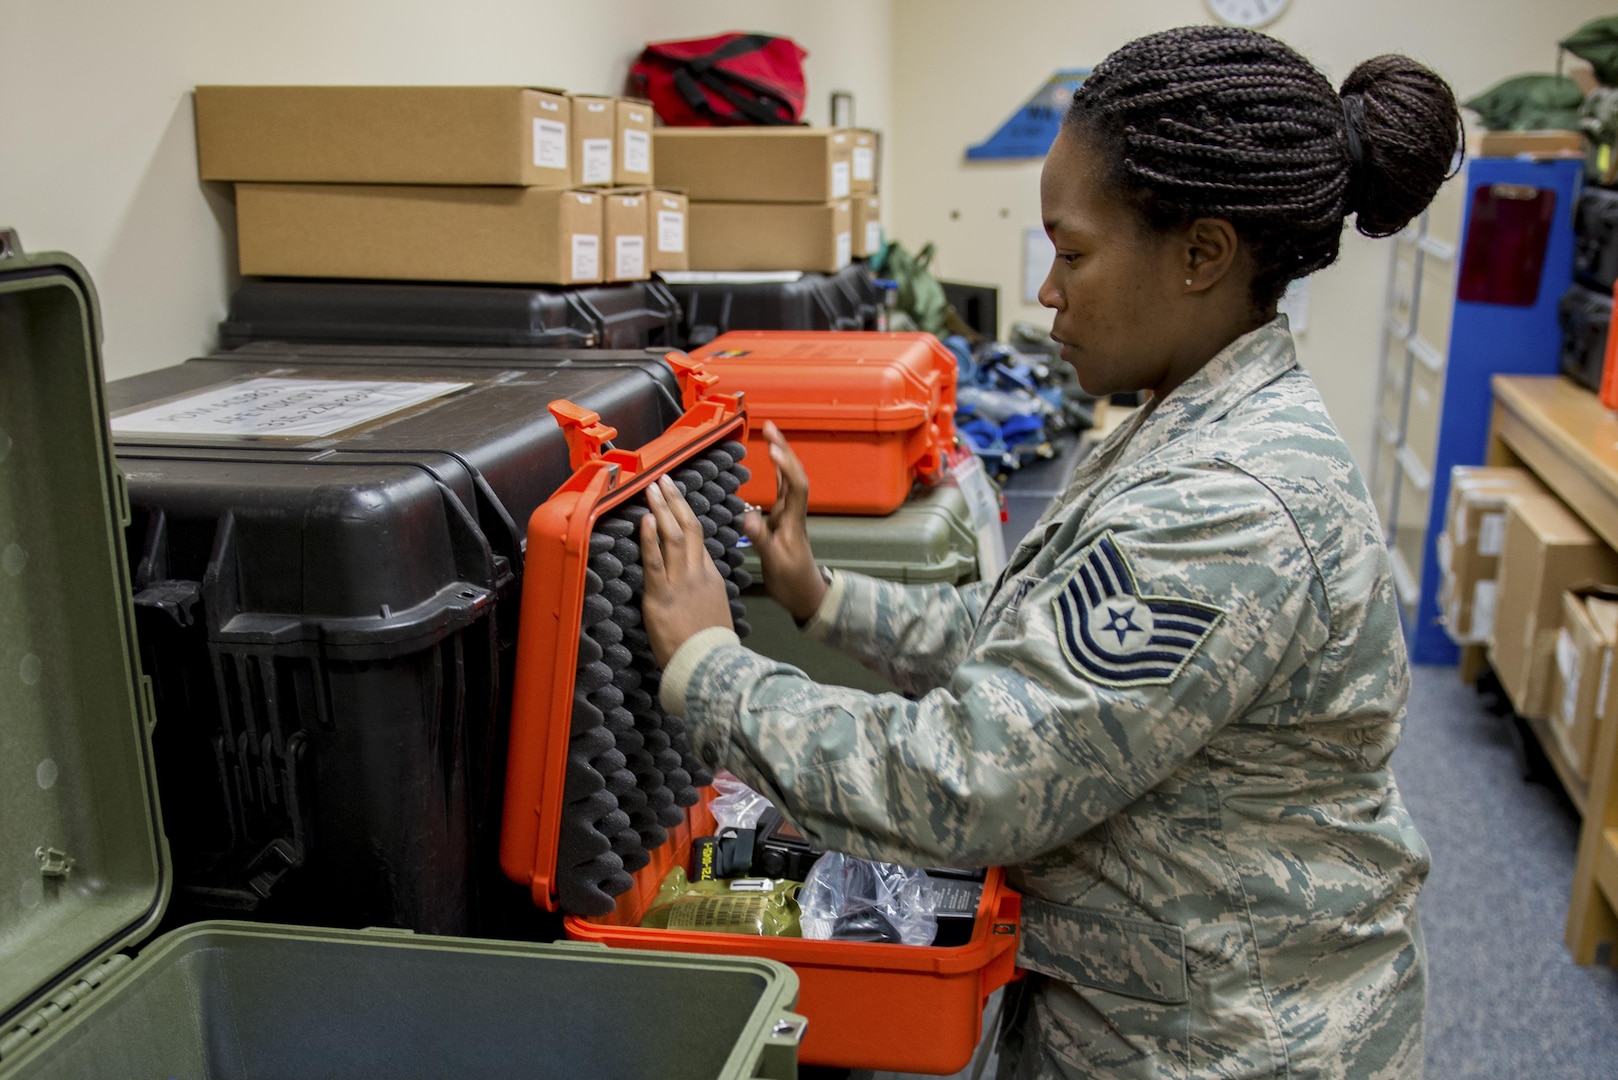 Tech. Sgt. Shakuntala M. Willis, 374th Operations Support Squadron Aircrew Flight Equipment flight NCO in charge of the C-130J transition, inventories a new aircrew survival equipment kit Jan. 20, 2017, at Yokota Air Base, Japan. For the new C-130J Super Hercules aircrafts scheduled to arrive at Yokota in 2017, brand-new aircrew life-support and survival equipment will also be supplied by the 374th AFE flight. (U.S. Air Force photo by Airman 1st Class Donald Hudson)